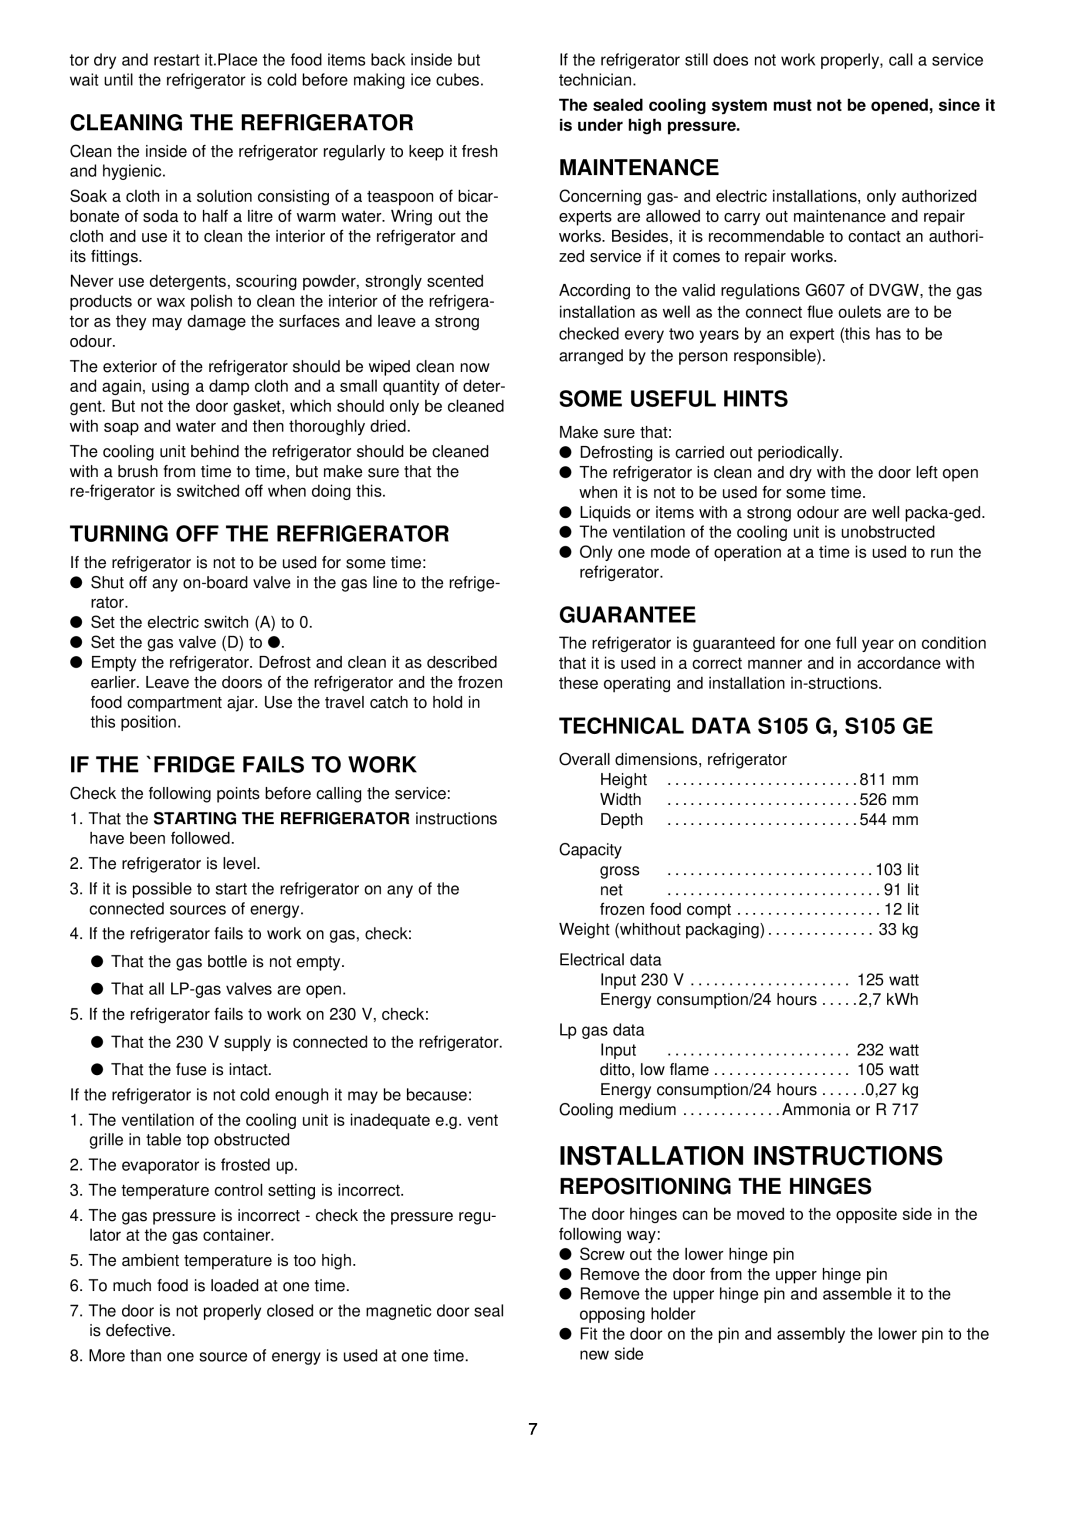 Frigidaire S105GE Installation Instructions, Cleaning The Refrigerator, Turning Off The Refrigerator, Maintenance 